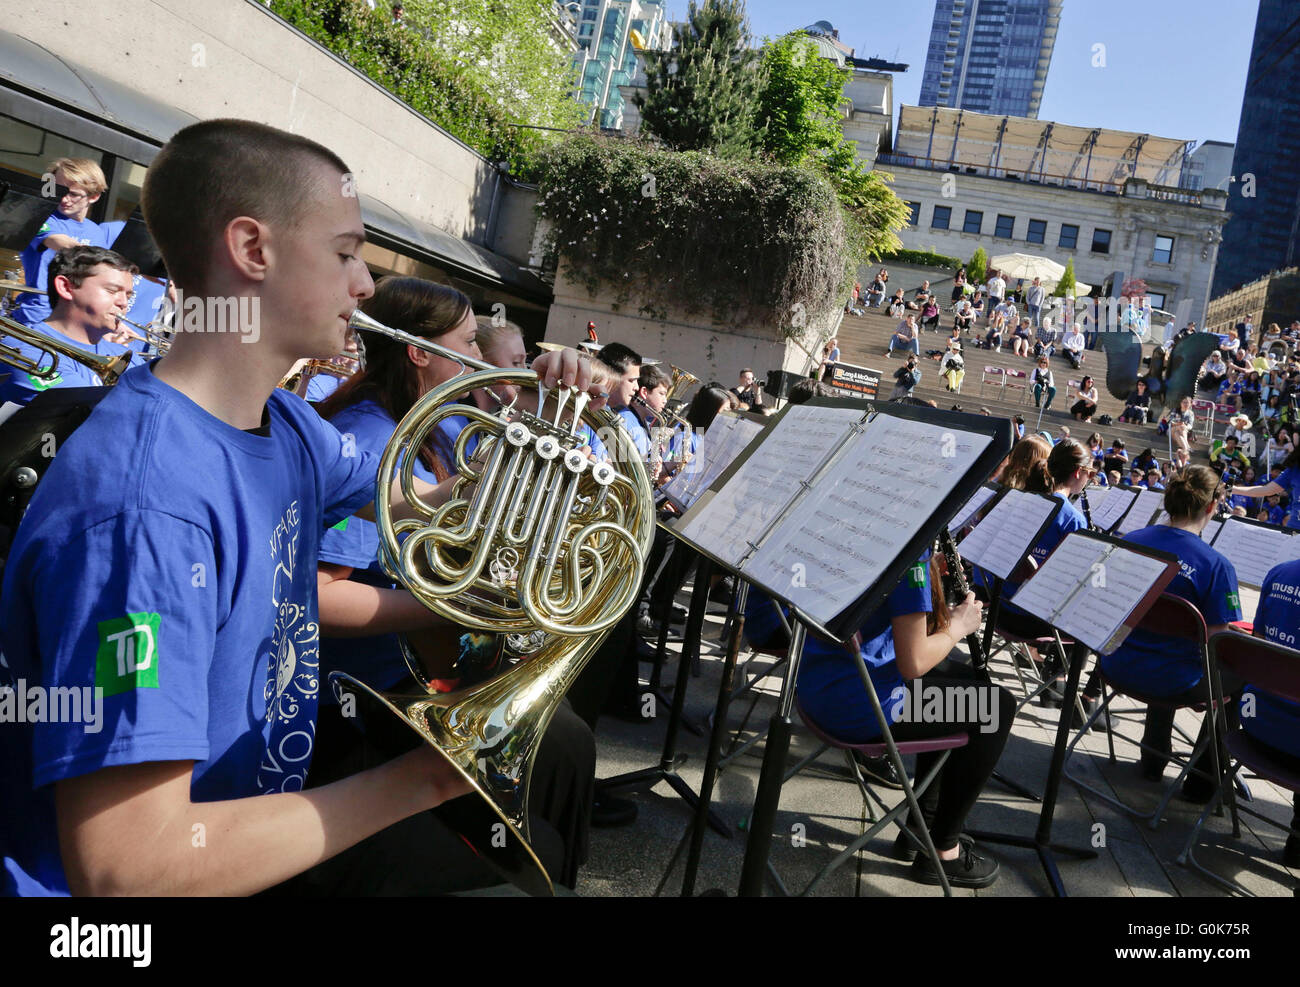 Vancouver, Canada. 2nd May, 2016. Members of a student band perform during the 'Music Monday' event at Robson Square in Vancouver, Canada, May. 2, 2016. More than 200 students perform a music concert in the public space in downtown Vancouver during the national wide 12th annual Music Monday event. The Music Monday is a large single event dedicated to promoting music education launched in 2005 by the Coalition for Music Education in Canada . Credit:  Liang Sen/Xinhua/Alamy Live News Stock Photo